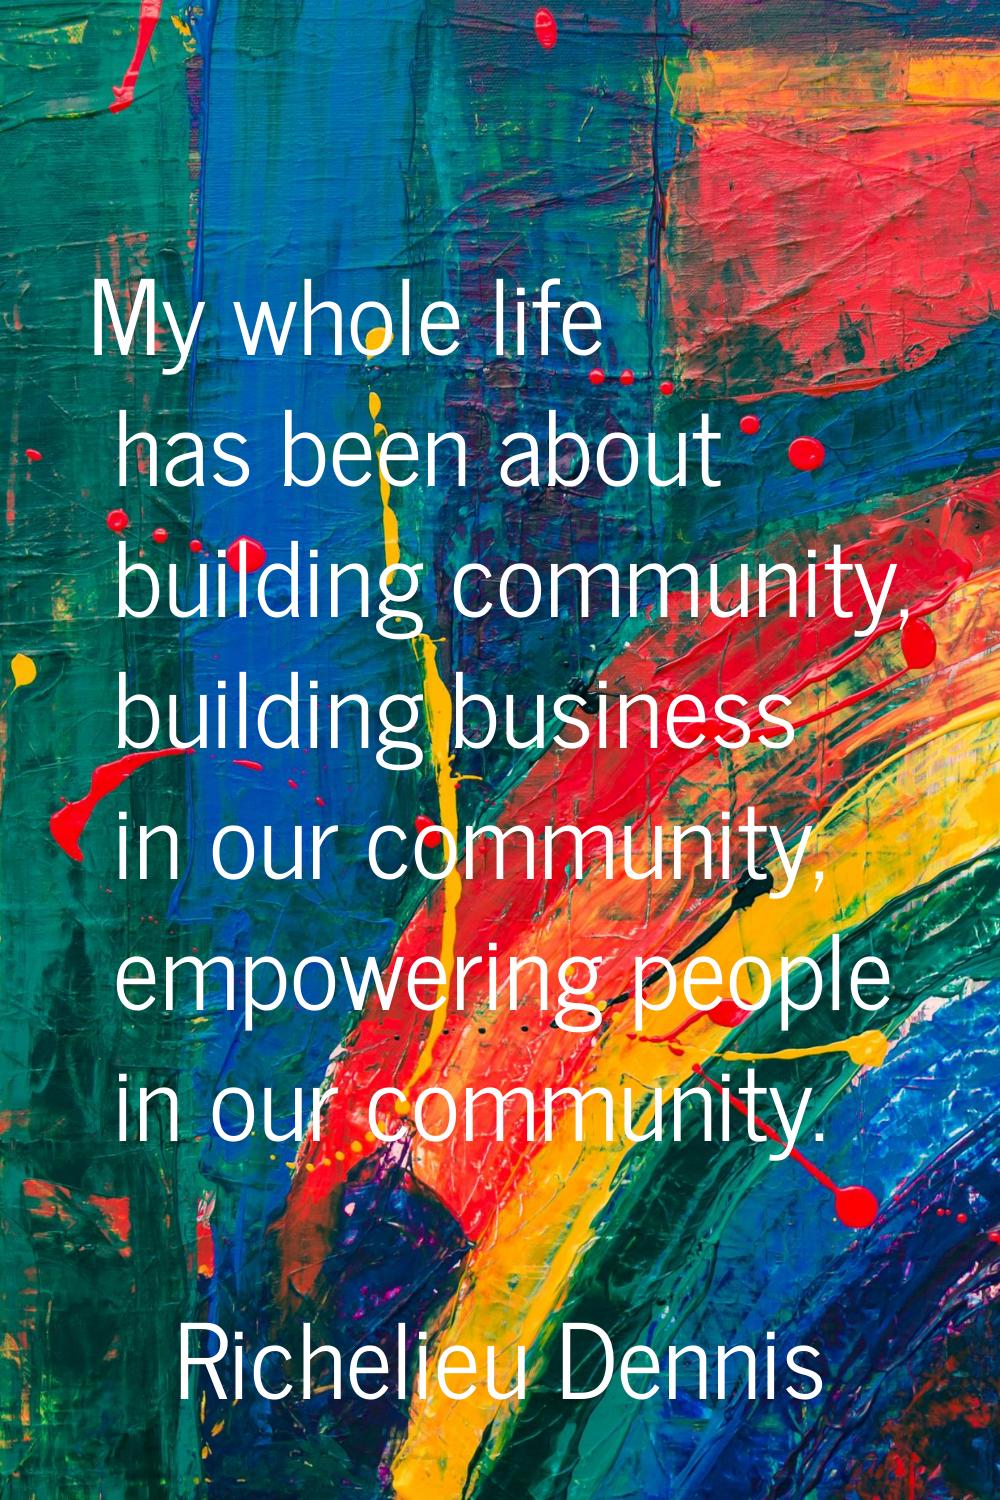 My whole life has been about building community, building business in our community, empowering peo